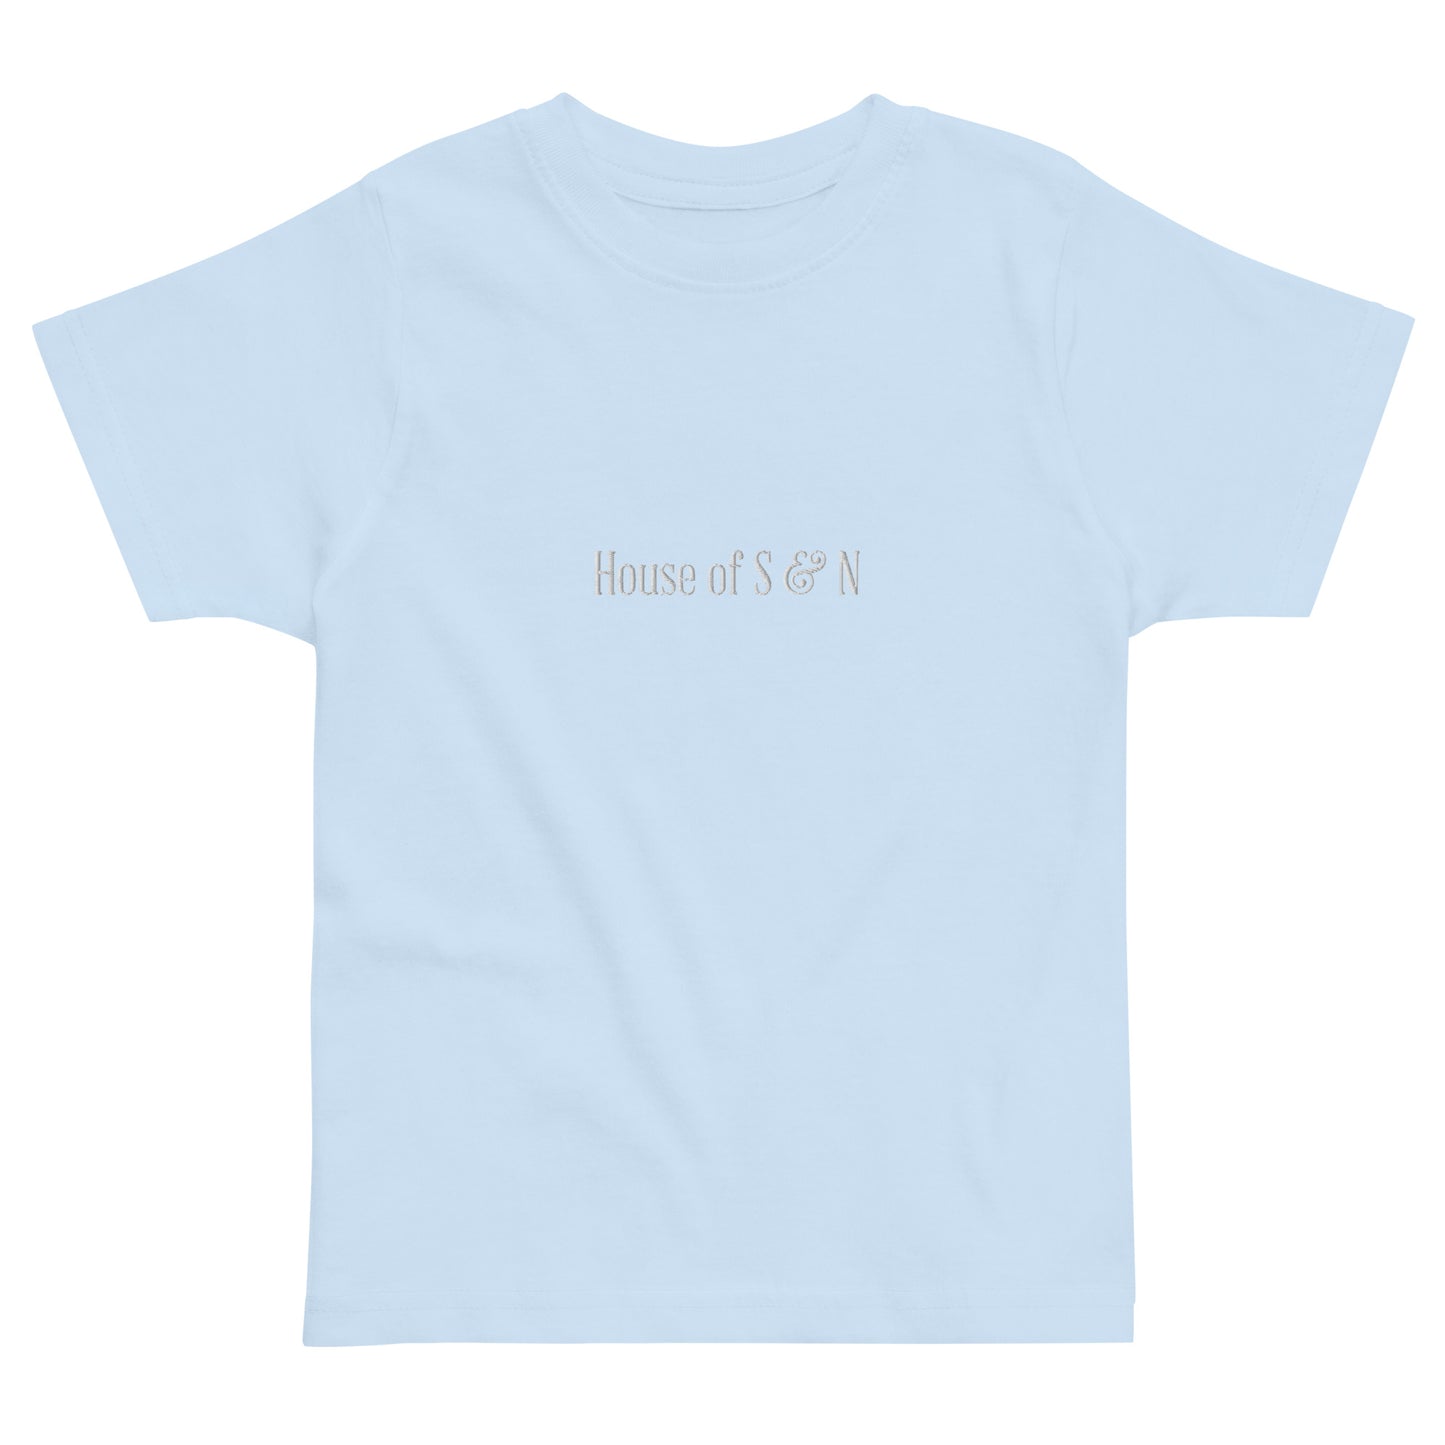 Toddler jersey t-shirt - House of S & N